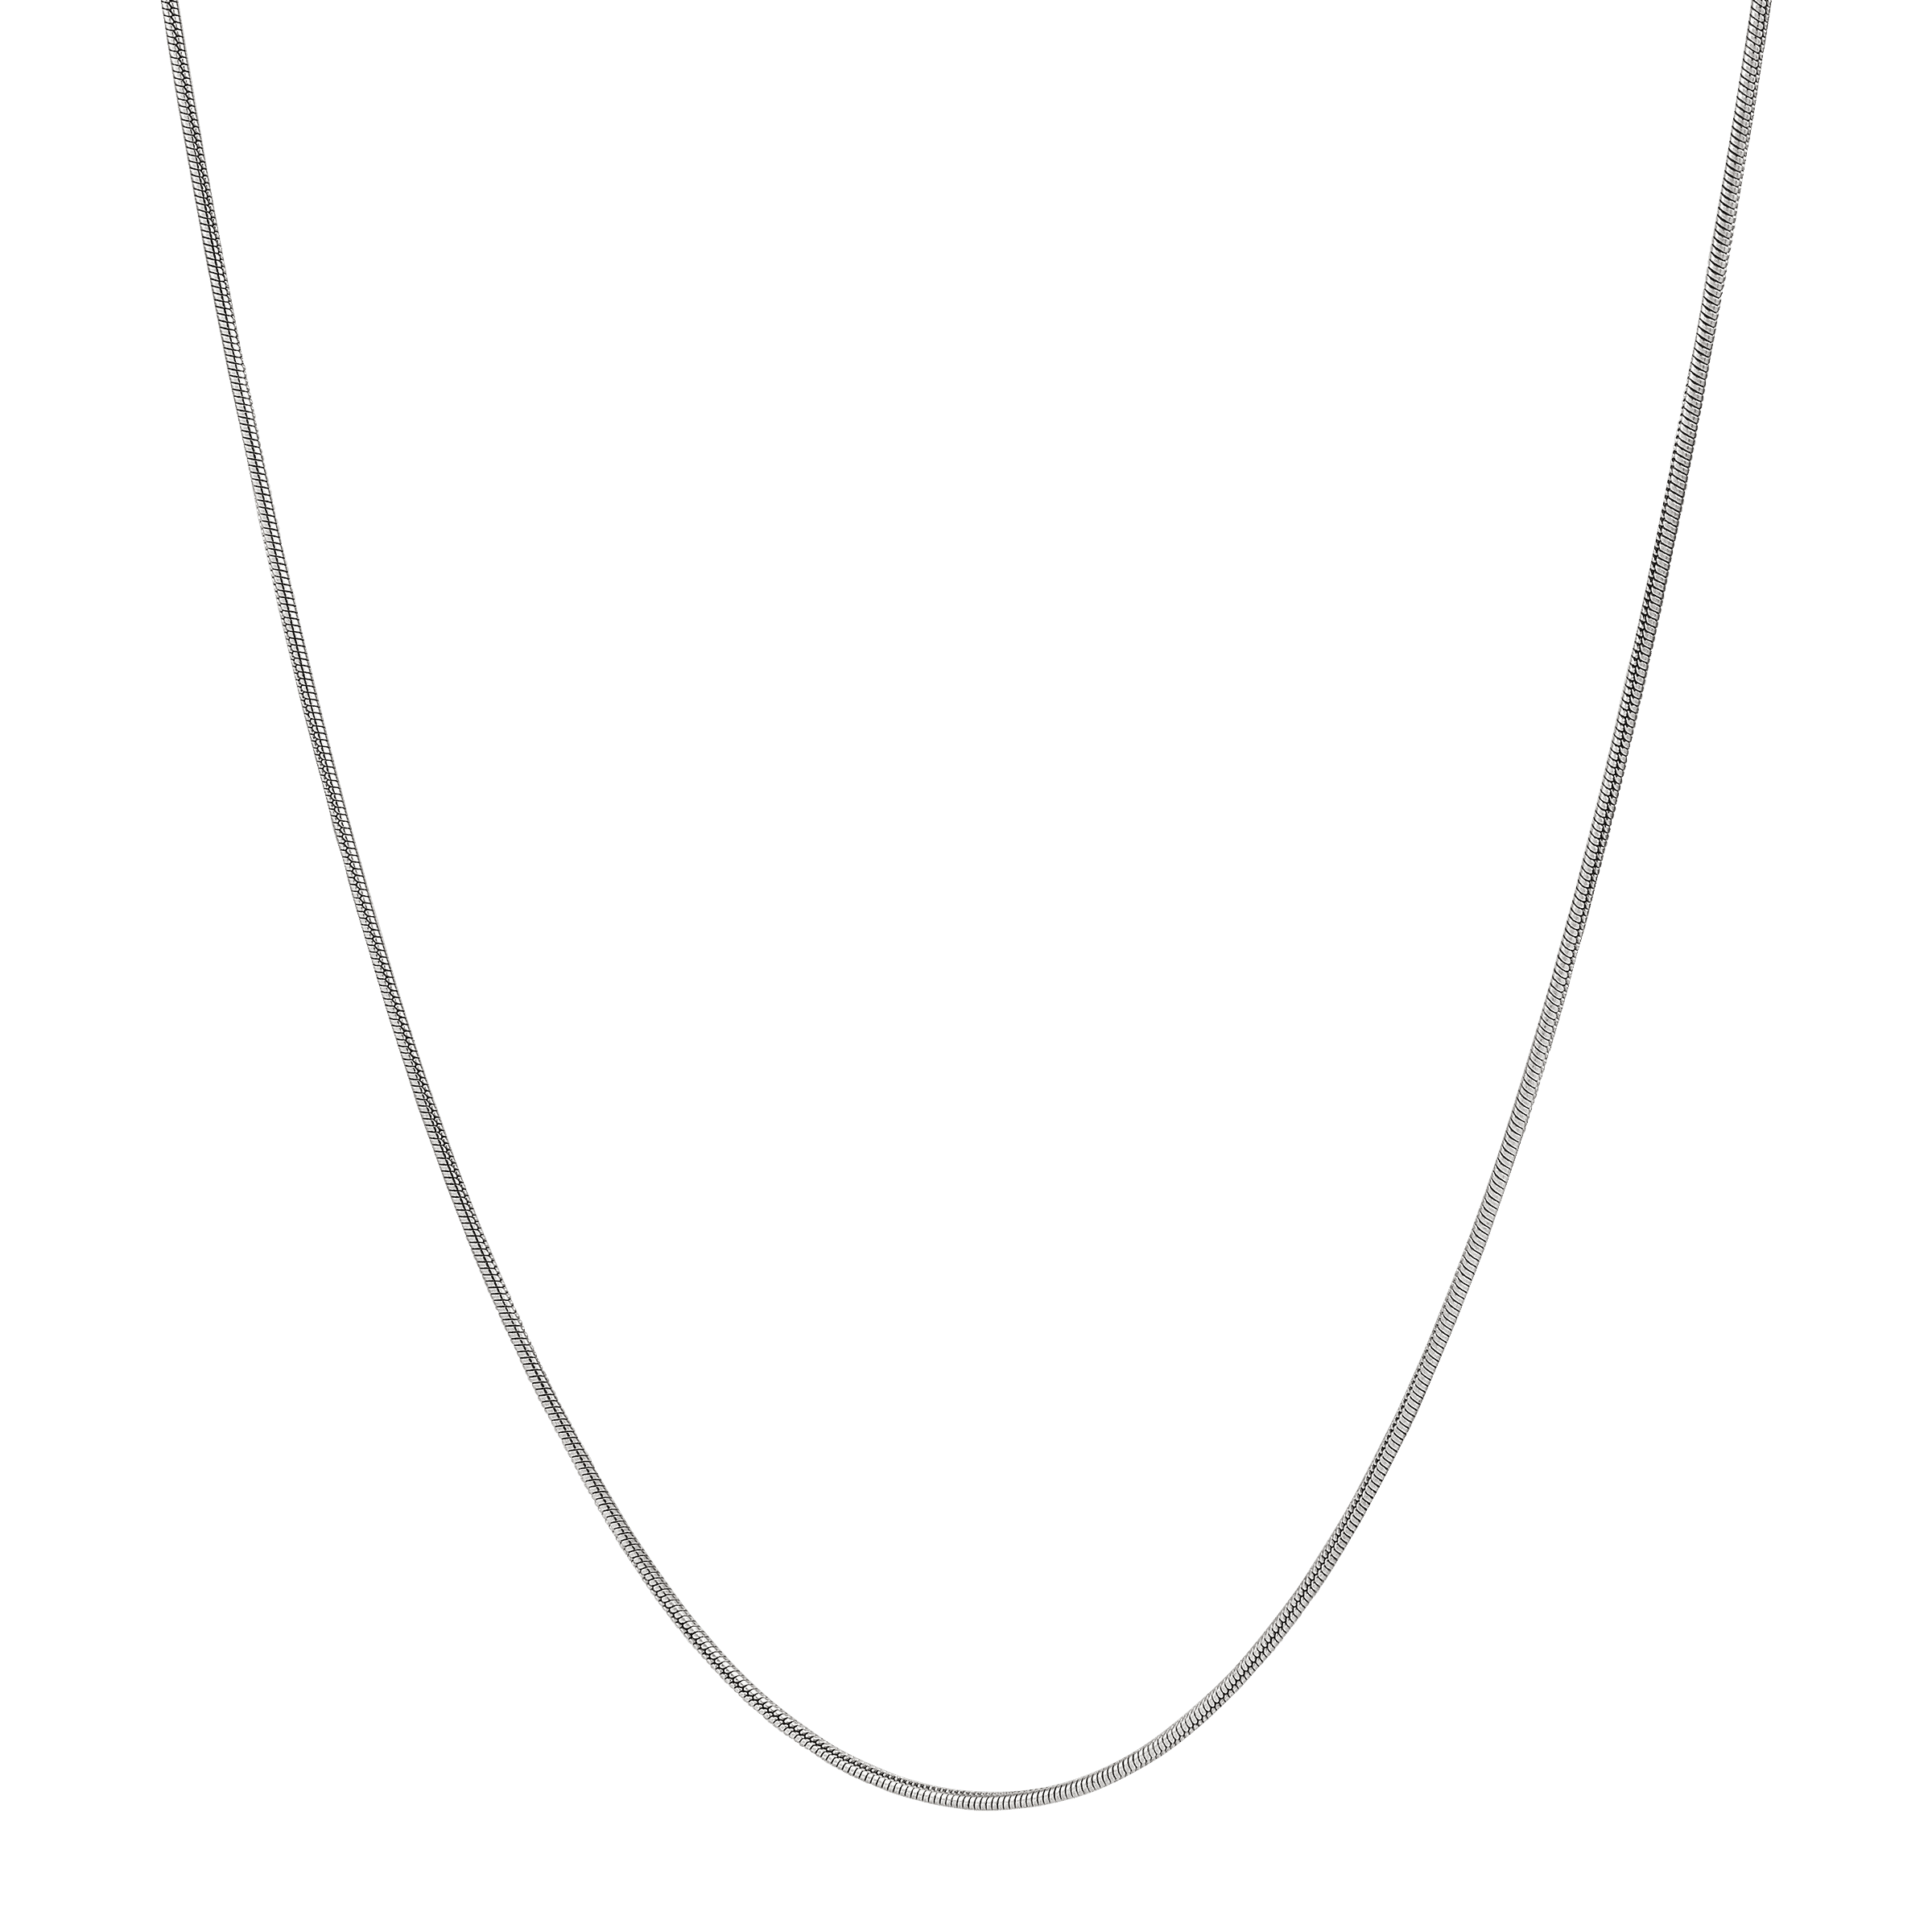 Silpada 'Daydreamer' Chain Necklace in Sterling Silver, 16